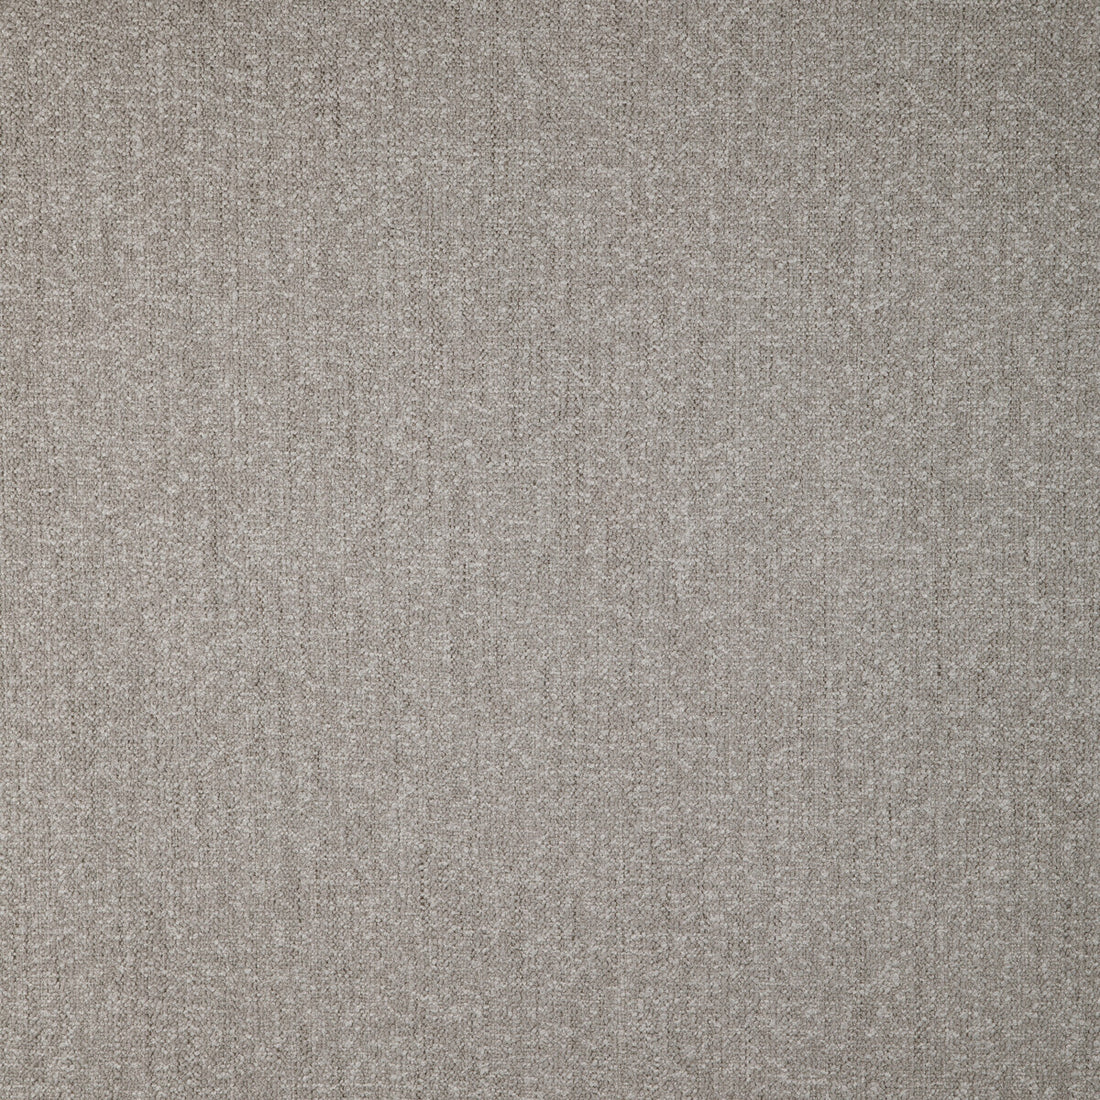 Subtle Boucle fabric in storm color - pattern 36835.1101.0 - by Kravet Basics in the Candice Olson collection